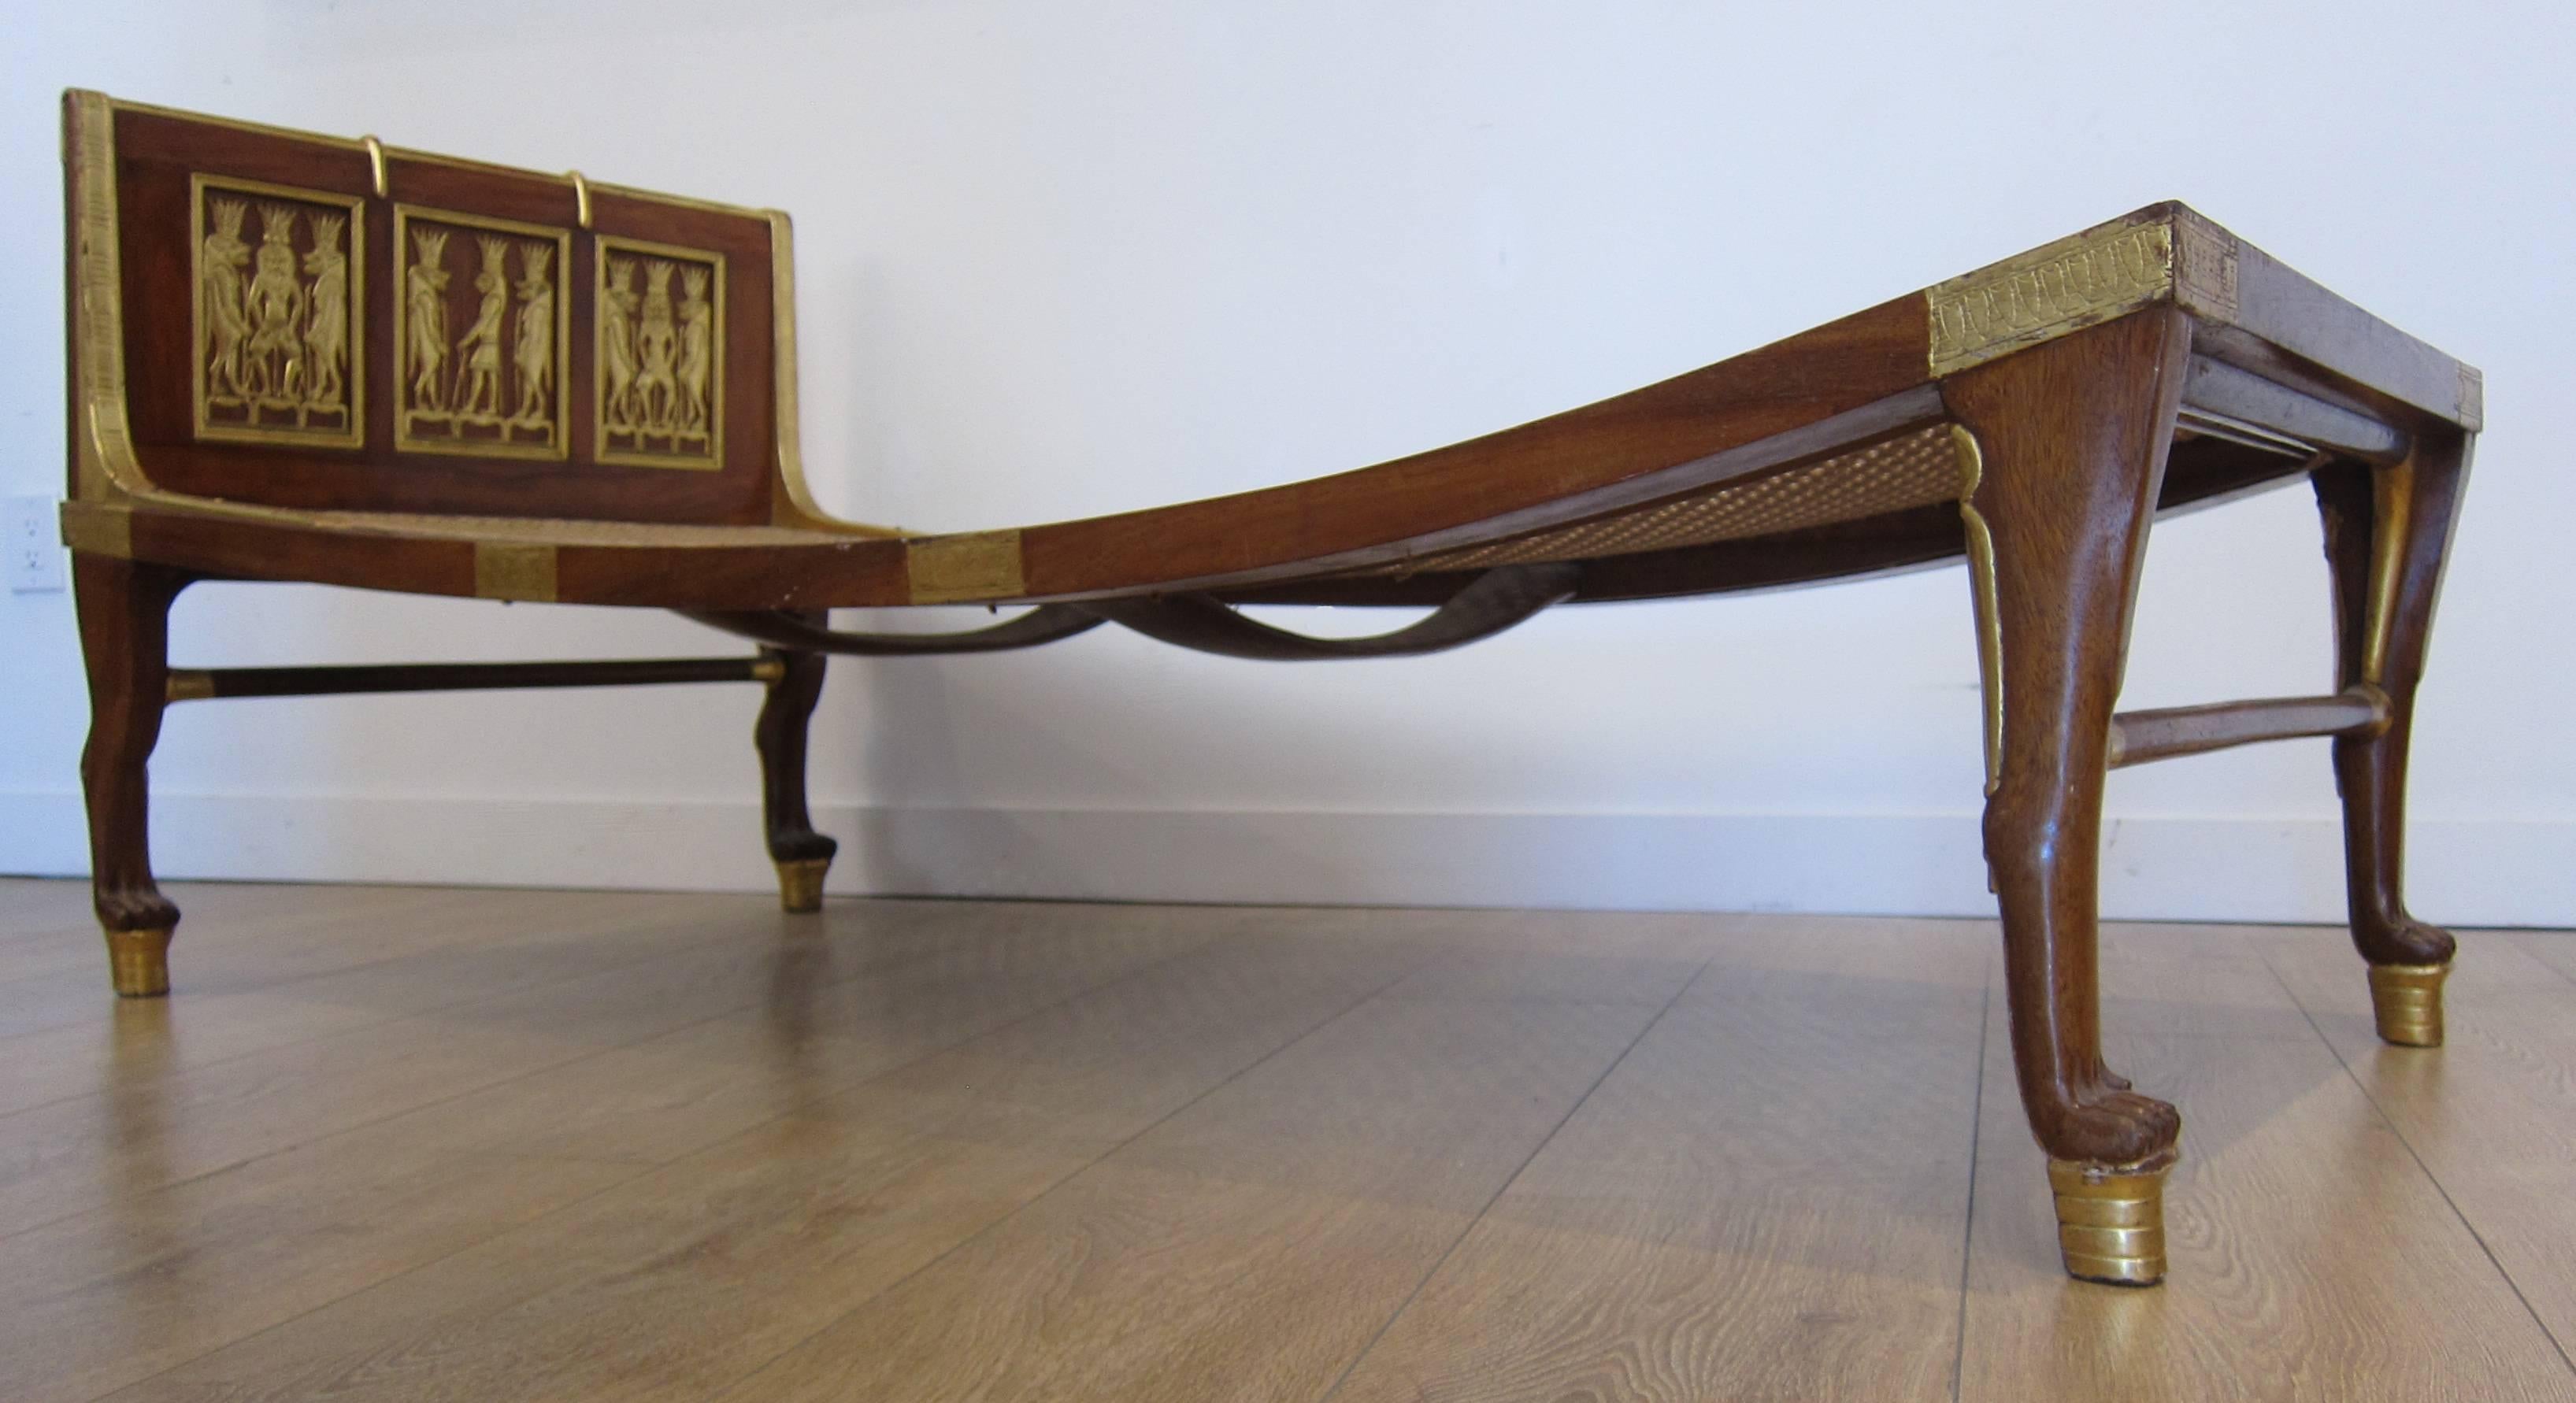 Absolutely beautiful Egyptian revival style daybed or chaise longue. Finely carved mahogany legs in the form of lion paws. Well executed parcel gilt artworks displayed on the headboard, sides and foot board of the bed. Mattress is made of plaited